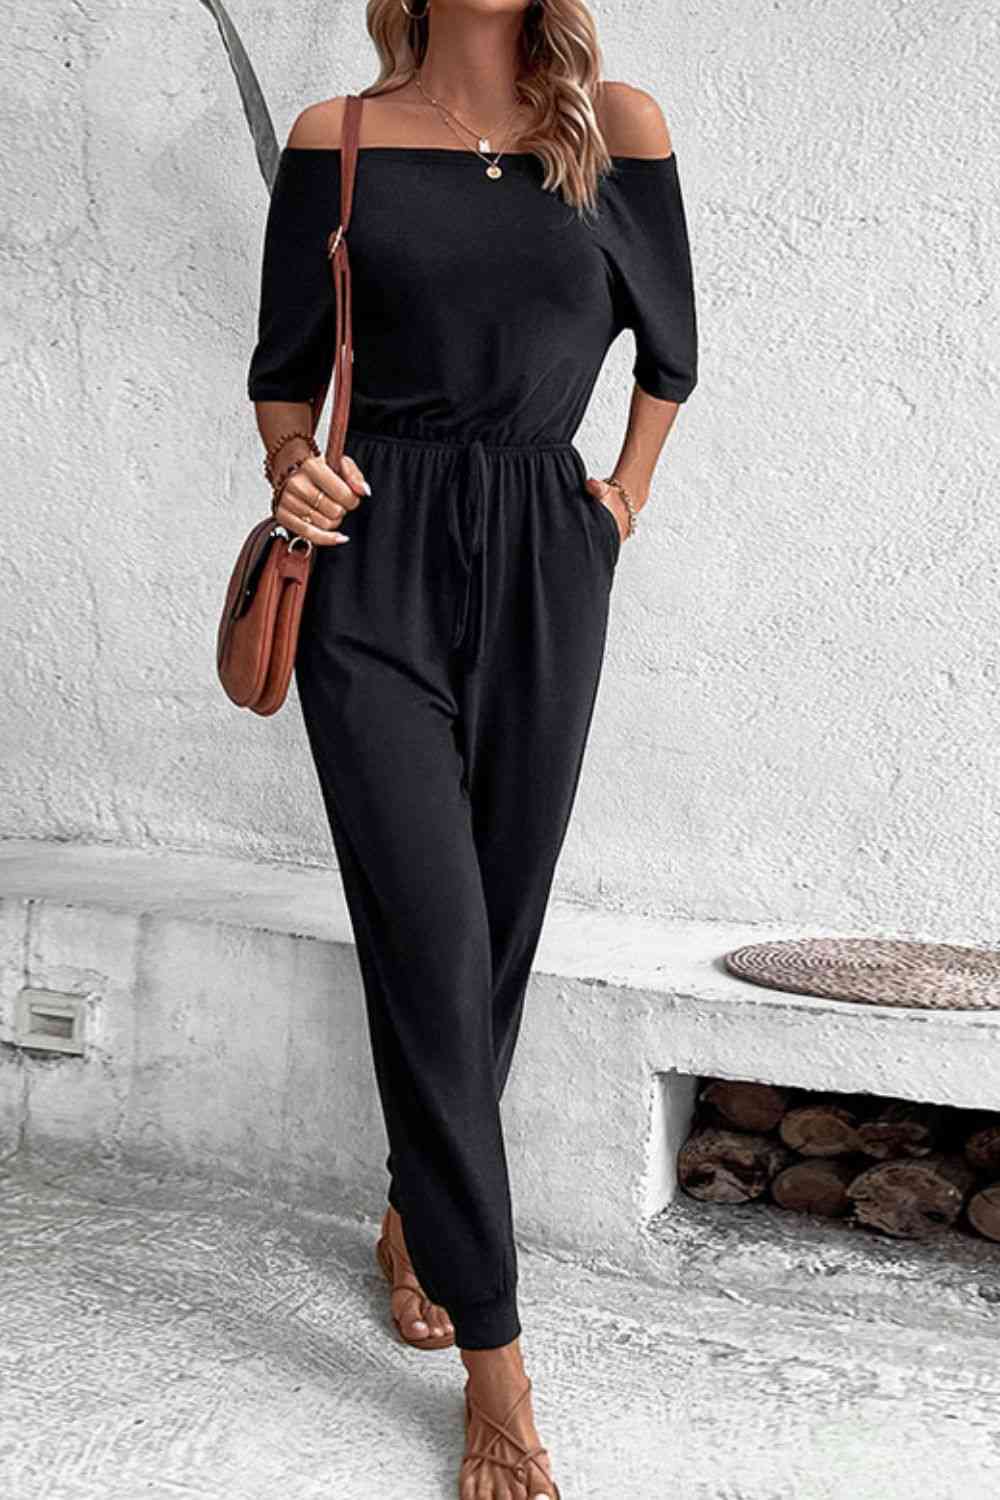 Off-Shoulder Jumpsuit with Pockets -  - Wild Willows Boutique - Massapequa, NY, affordable and fashionable clothing for women of all ages. Bottoms, tops, dresses, intimates, outerwear, sweater, shoes, accessories, jewelry, active wear, and more // Wild Willow Boutique.